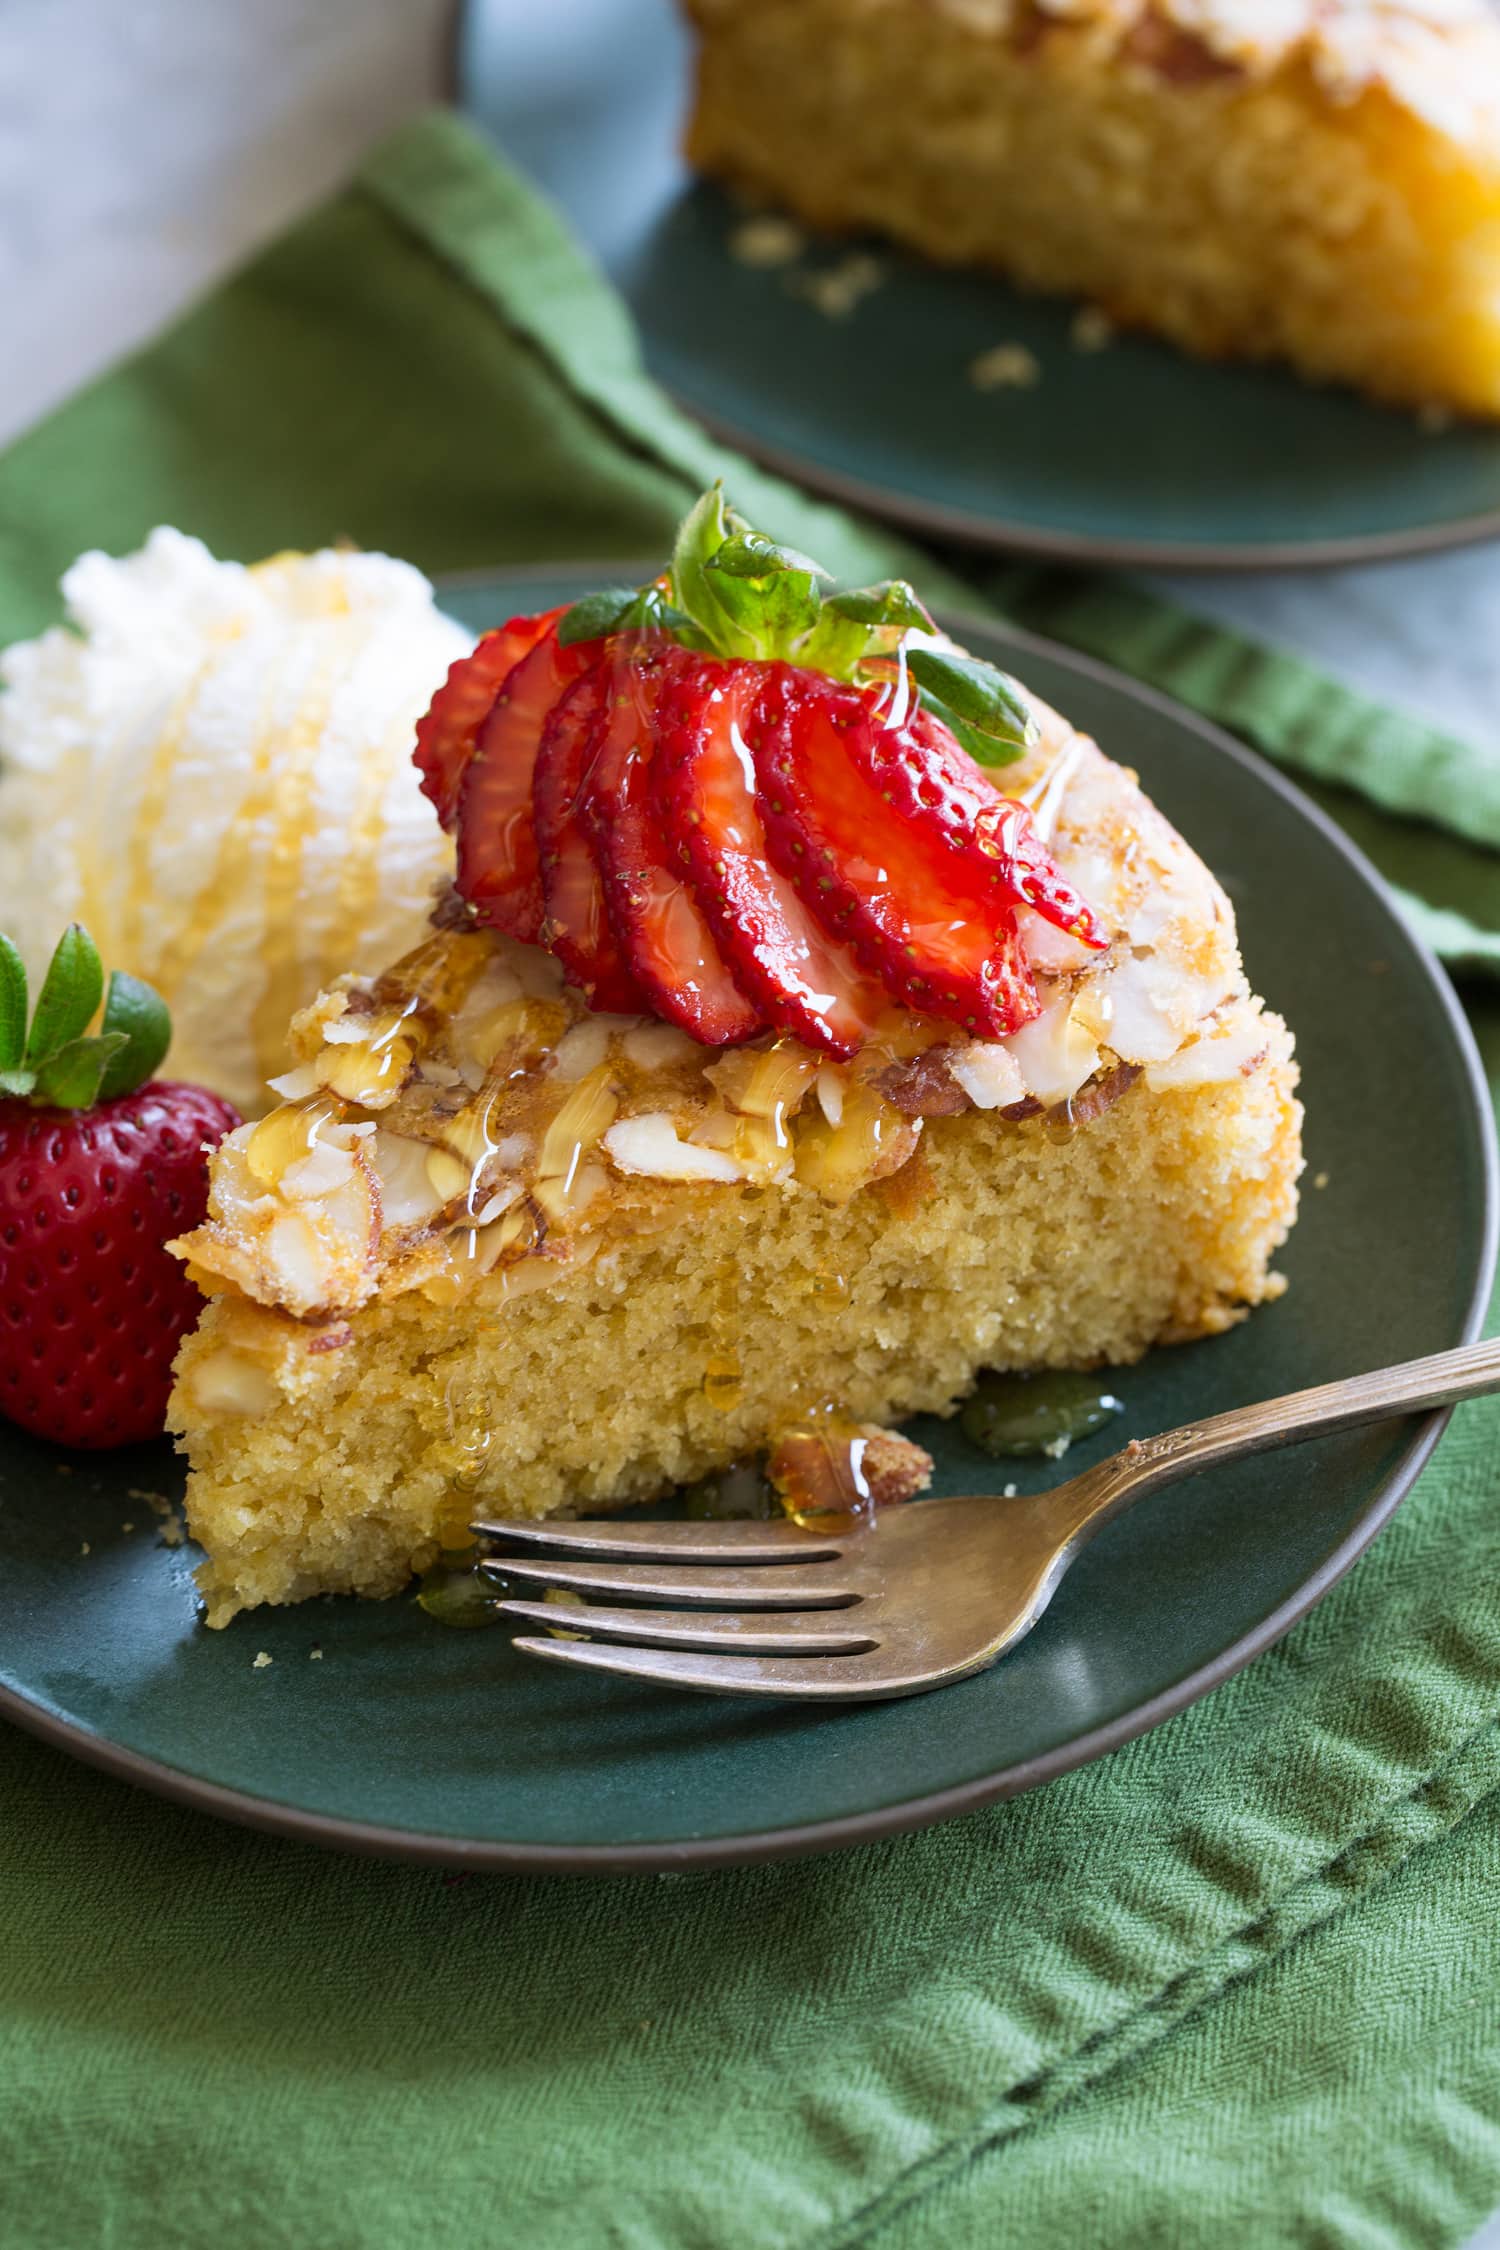 Honey cake shown with variation of serving with strawberries and ice cream.